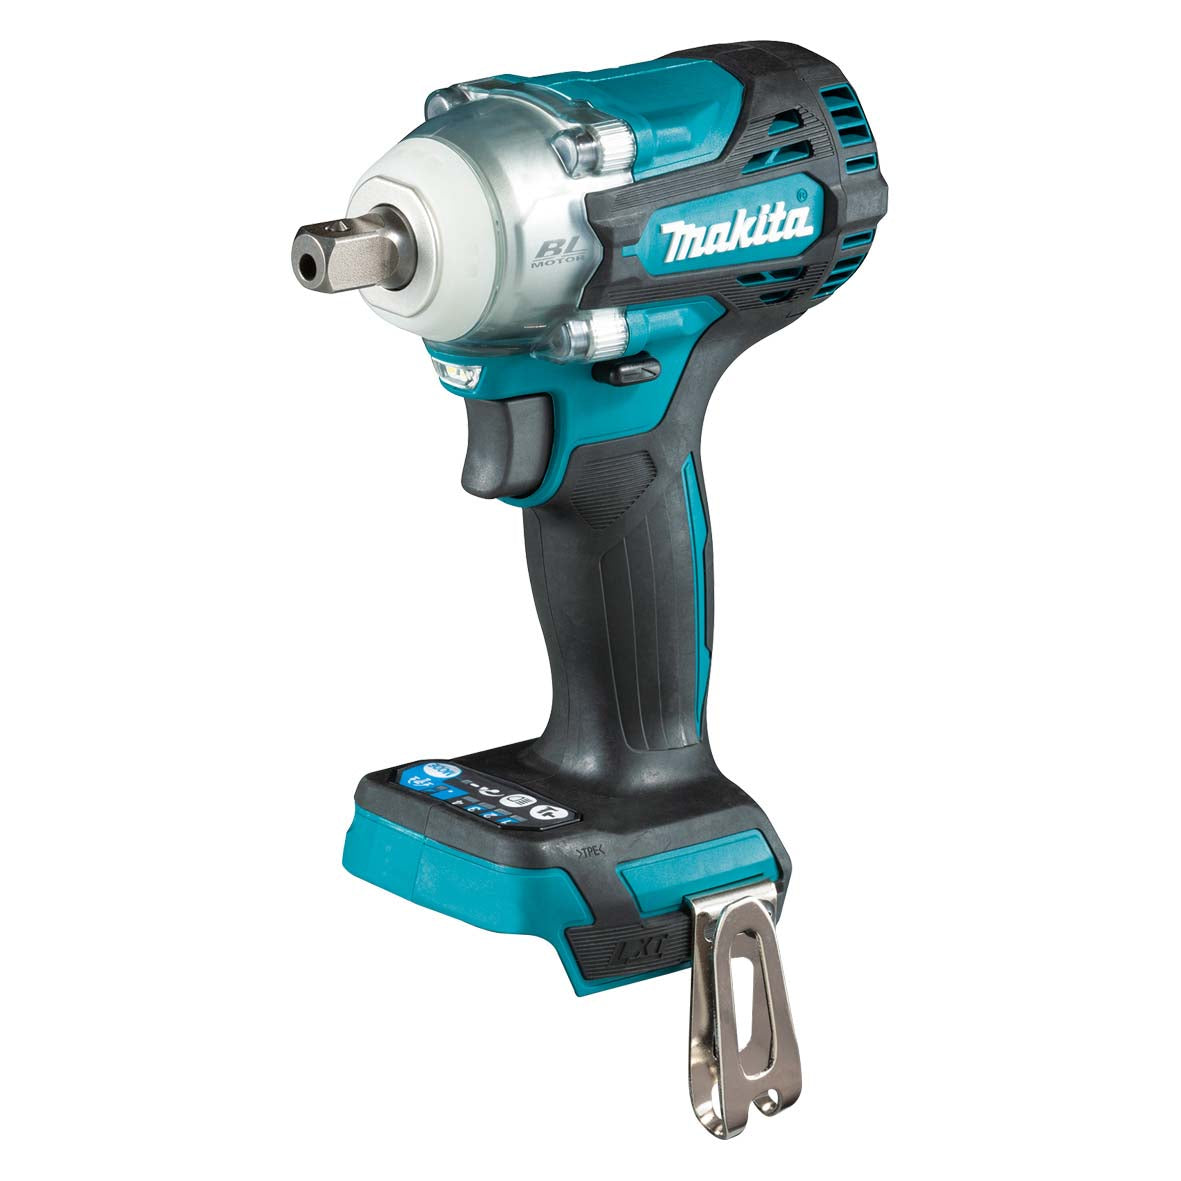 18V 1/2" Brushless Detent Pin Impact Wrench Bare (Tool Only) DTW301Z by Makita